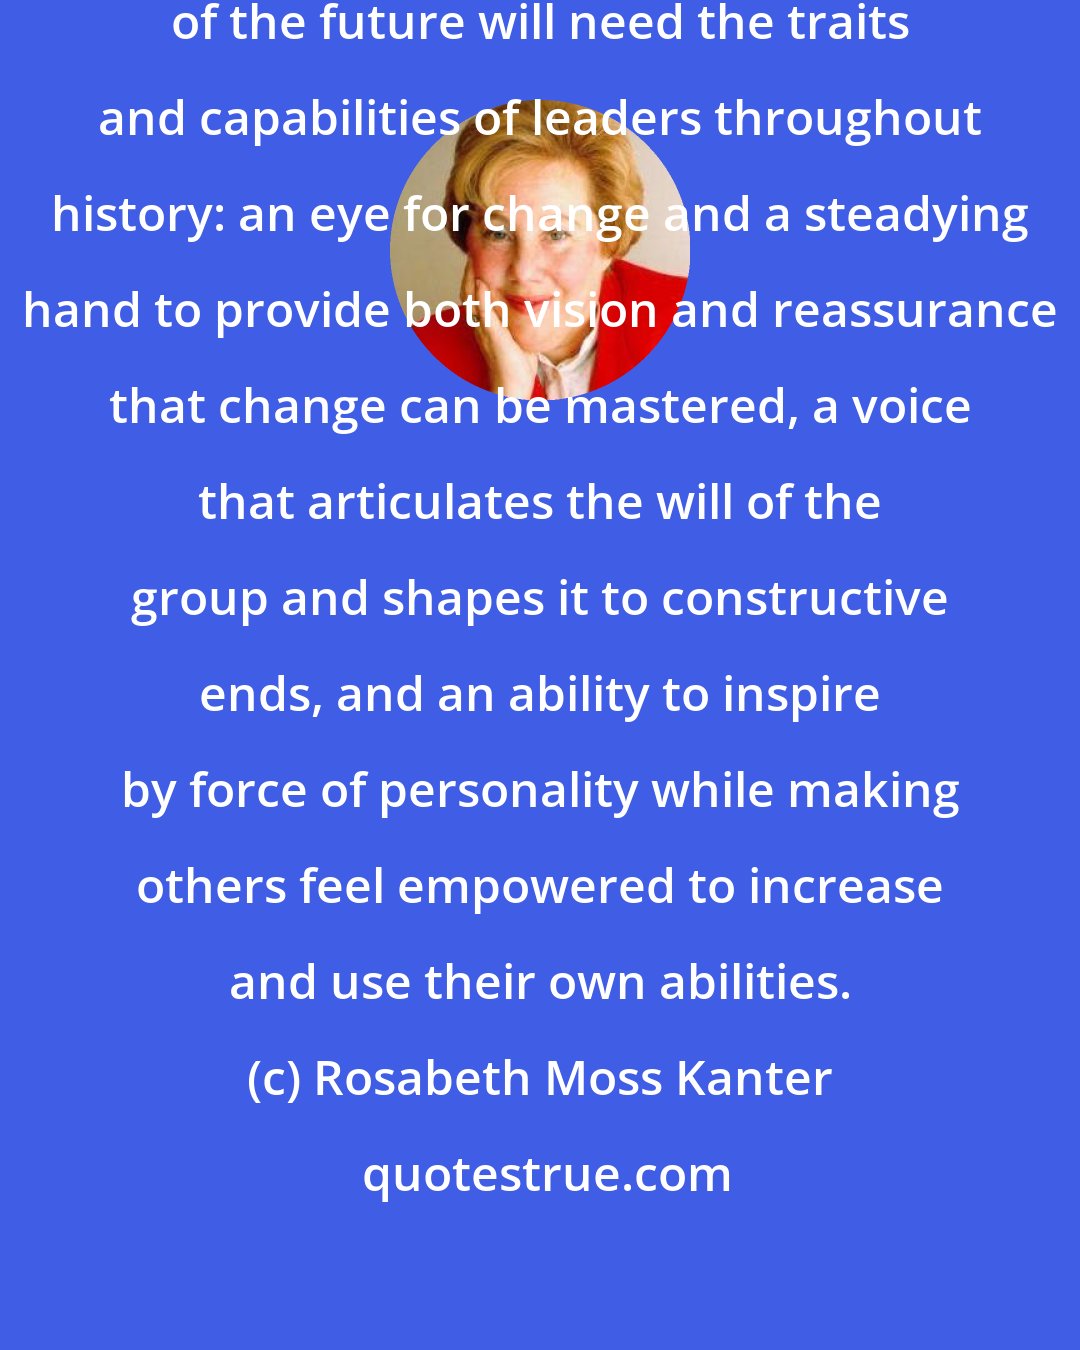 Rosabeth Moss Kanter: in most important ways, leaders of the future will need the traits and capabilities of leaders throughout history: an eye for change and a steadying hand to provide both vision and reassurance that change can be mastered, a voice that articulates the will of the group and shapes it to constructive ends, and an ability to inspire by force of personality while making others feel empowered to increase and use their own abilities.